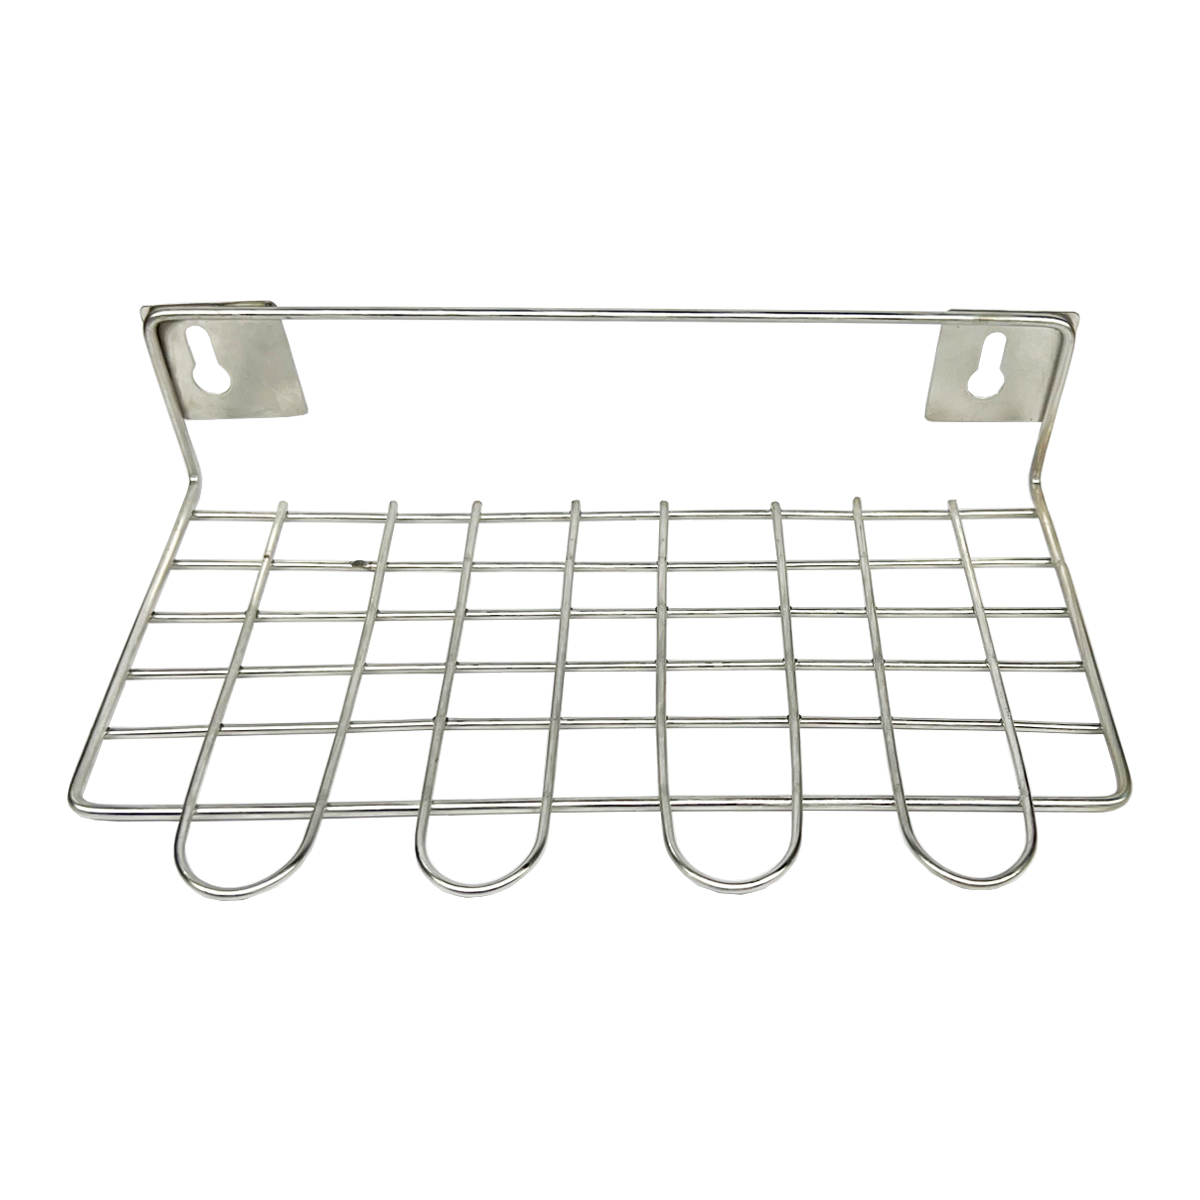 Oc9 Stainless Steel Ladle Stand / Spoon Rack / Wall Mounted Ladle Stand / Utensil Holda fo' Kitchen